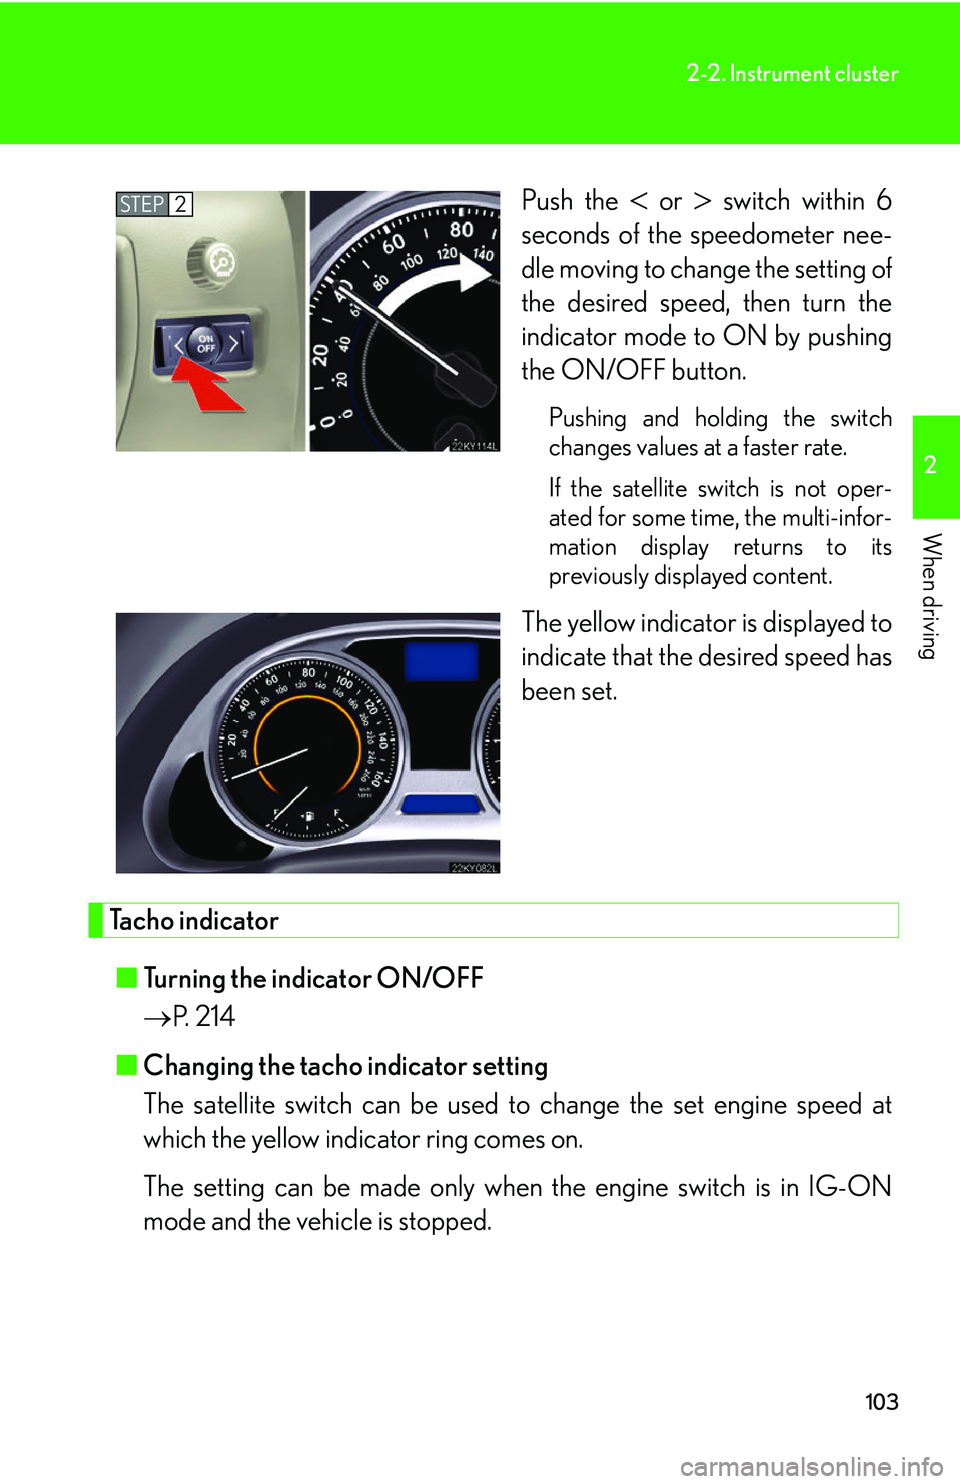 Lexus IS250 2006  Do-it-yourself maintenance / LEXUS 2006 IS350/250 THROUGH APRIL 2006 PROD.  (OM53508U) User Guide 103
2-2. Instrument cluster
2
When driving
Push the  or  switch within 6
seconds of the speedometer nee-
dle moving to change the setting of
the desired speed, then turn the
indicator mode to ON